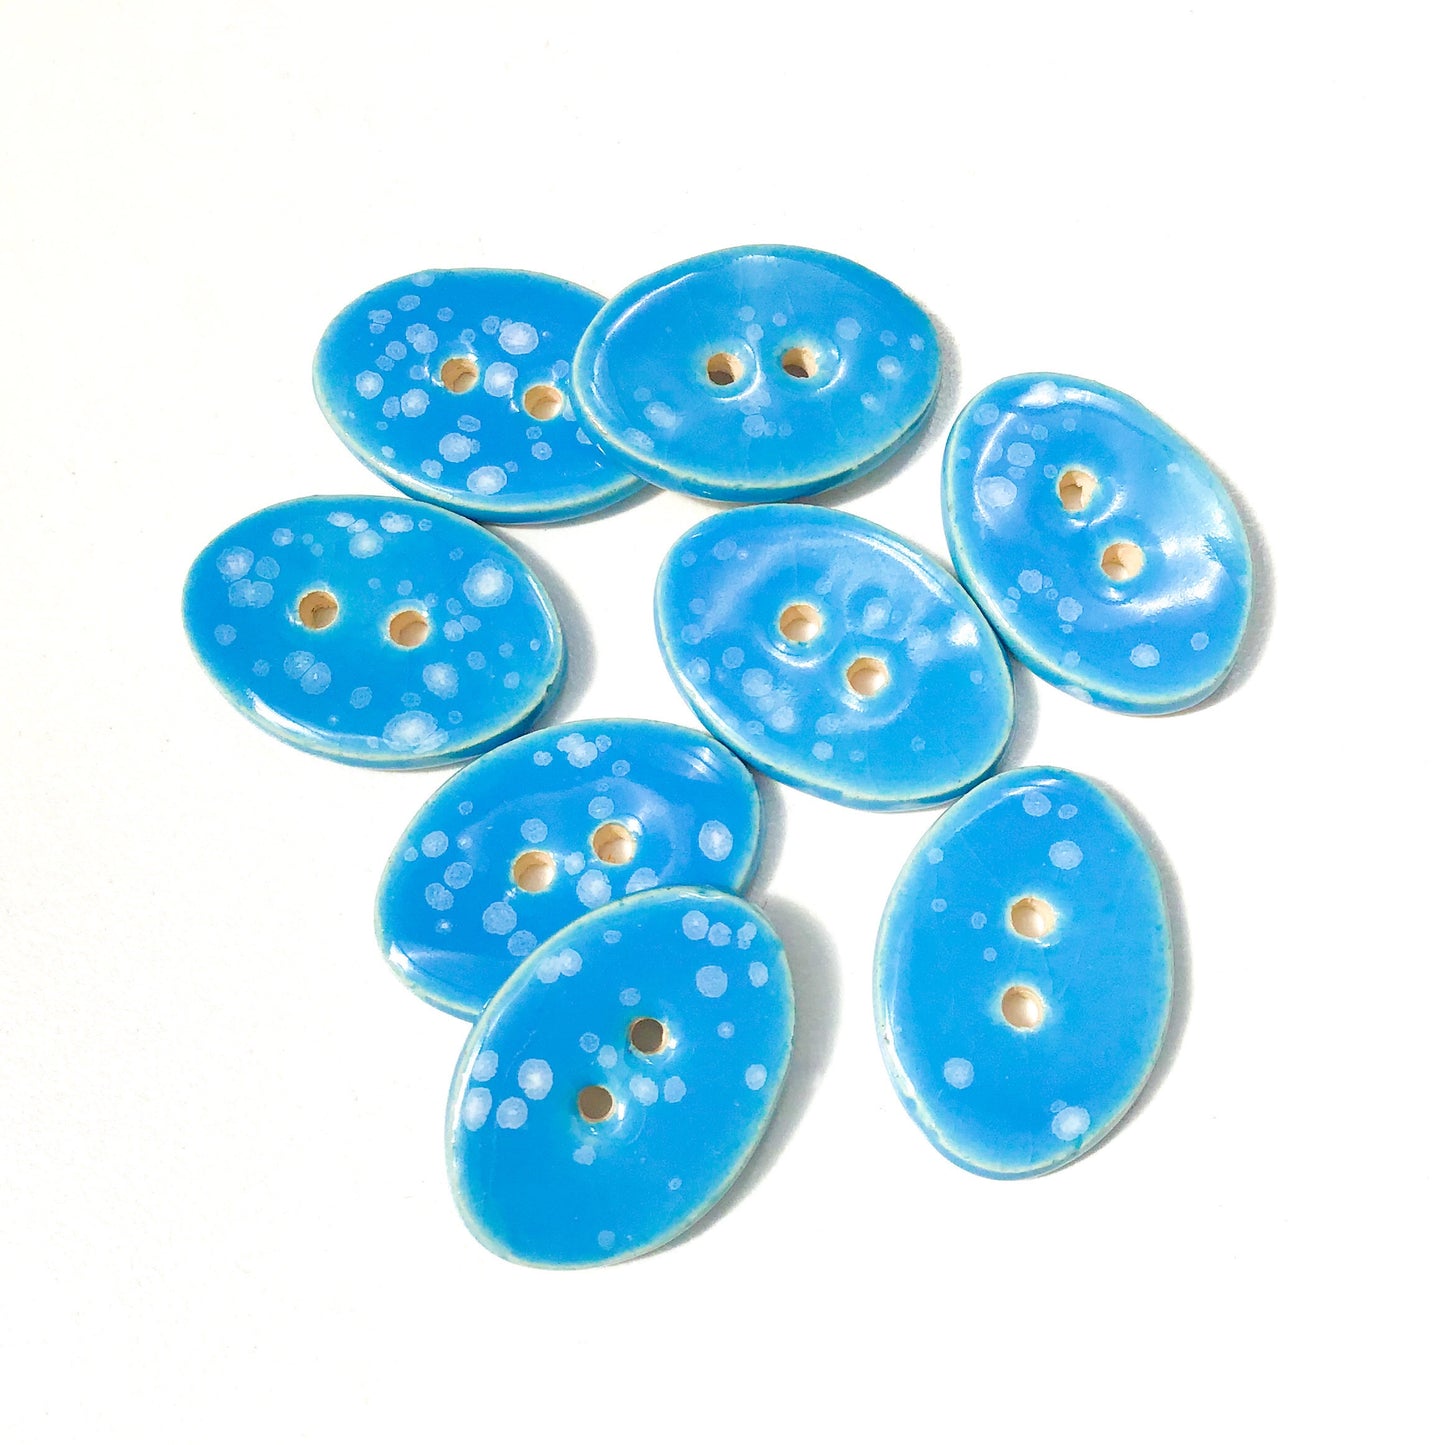 Speckled Bright Blue Oval Clay Buttons - 5/8" x 7/8" - 8 Pack (ws-210)